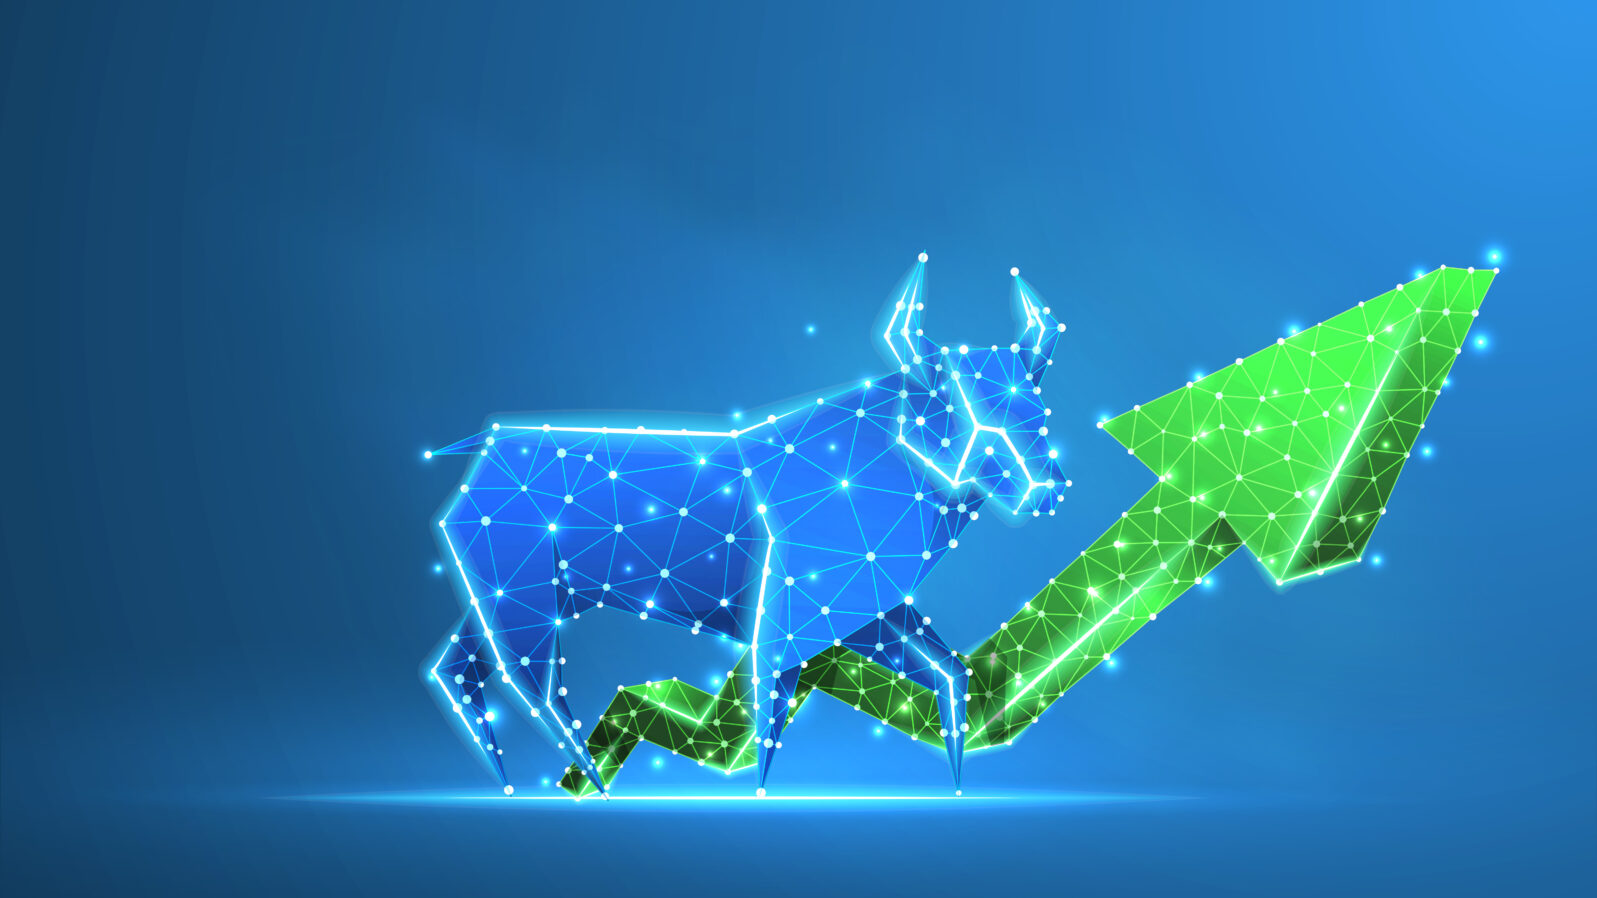 Bull market trend, green growth arrow. Stock Exchange and concept of a trading chart. Low poly, wireframe 3d Raster illustration. Abstract polygonal image on blue neon background